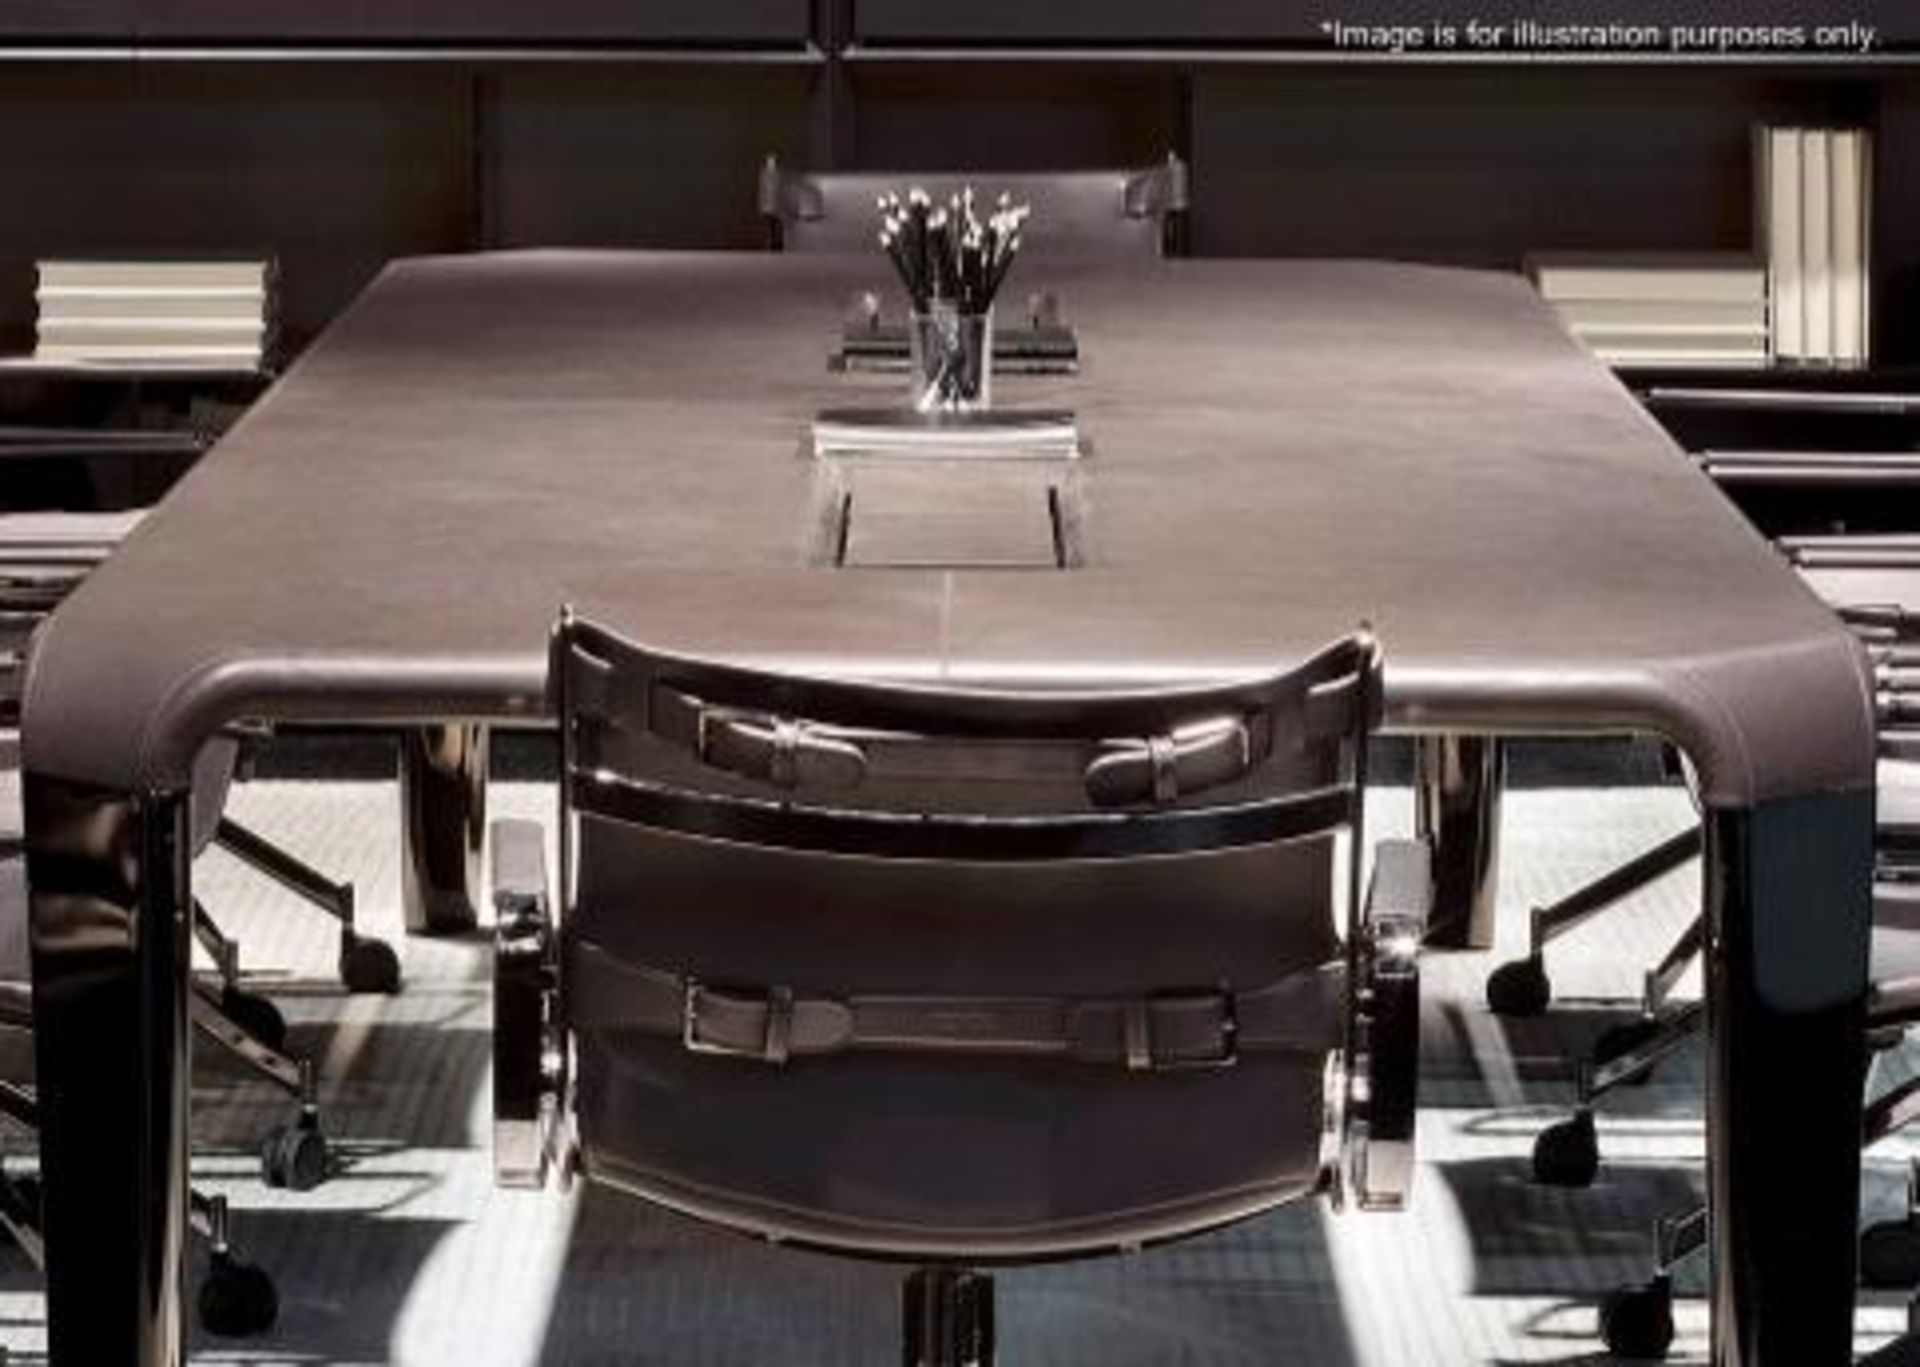 1 x FENDI "Serengeti" Leather Upholstered Conference Table - 320x125cm - Read Description - Image 2 of 11